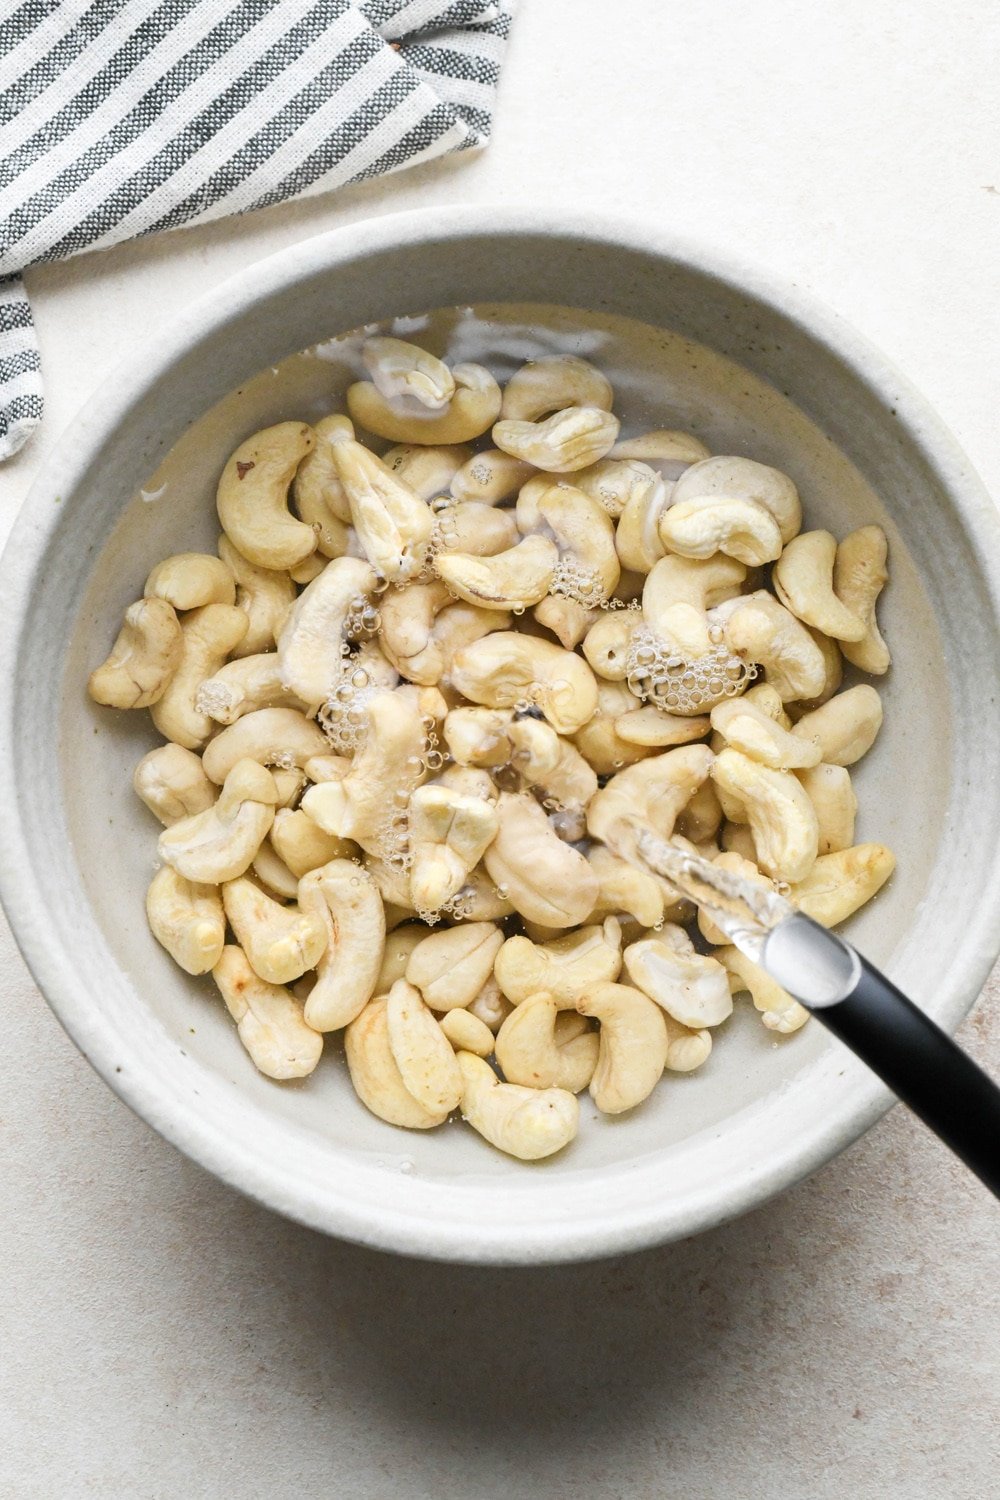 How to make cashew queso: A tea kettle pouring just boiled water into a ceramic bowl of raw cashews to soak.